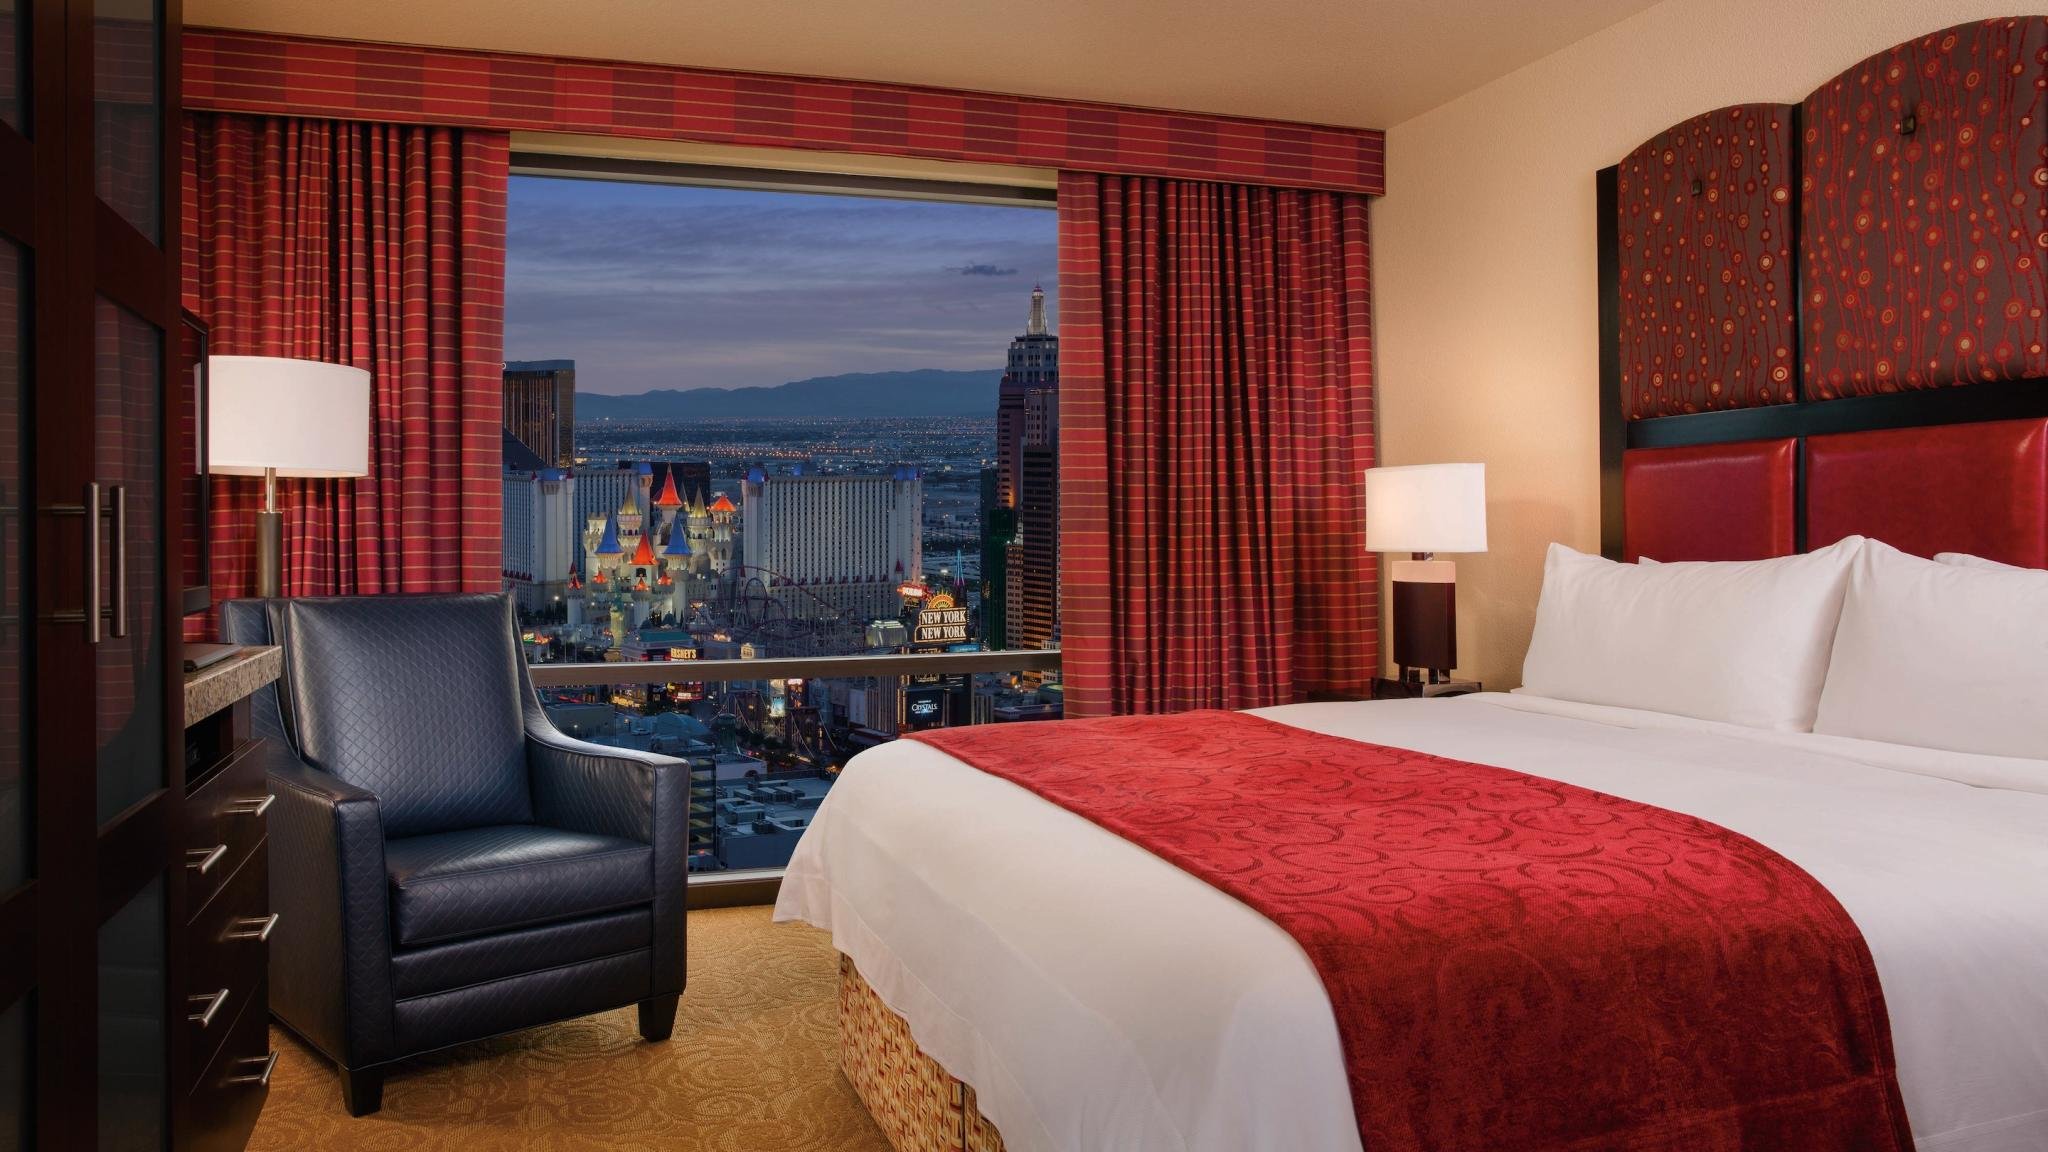 Comfortable studio available at Marriott's Grand Chateau right off the Strip.  Reviews, Deals & Photos 2023 - Expedia